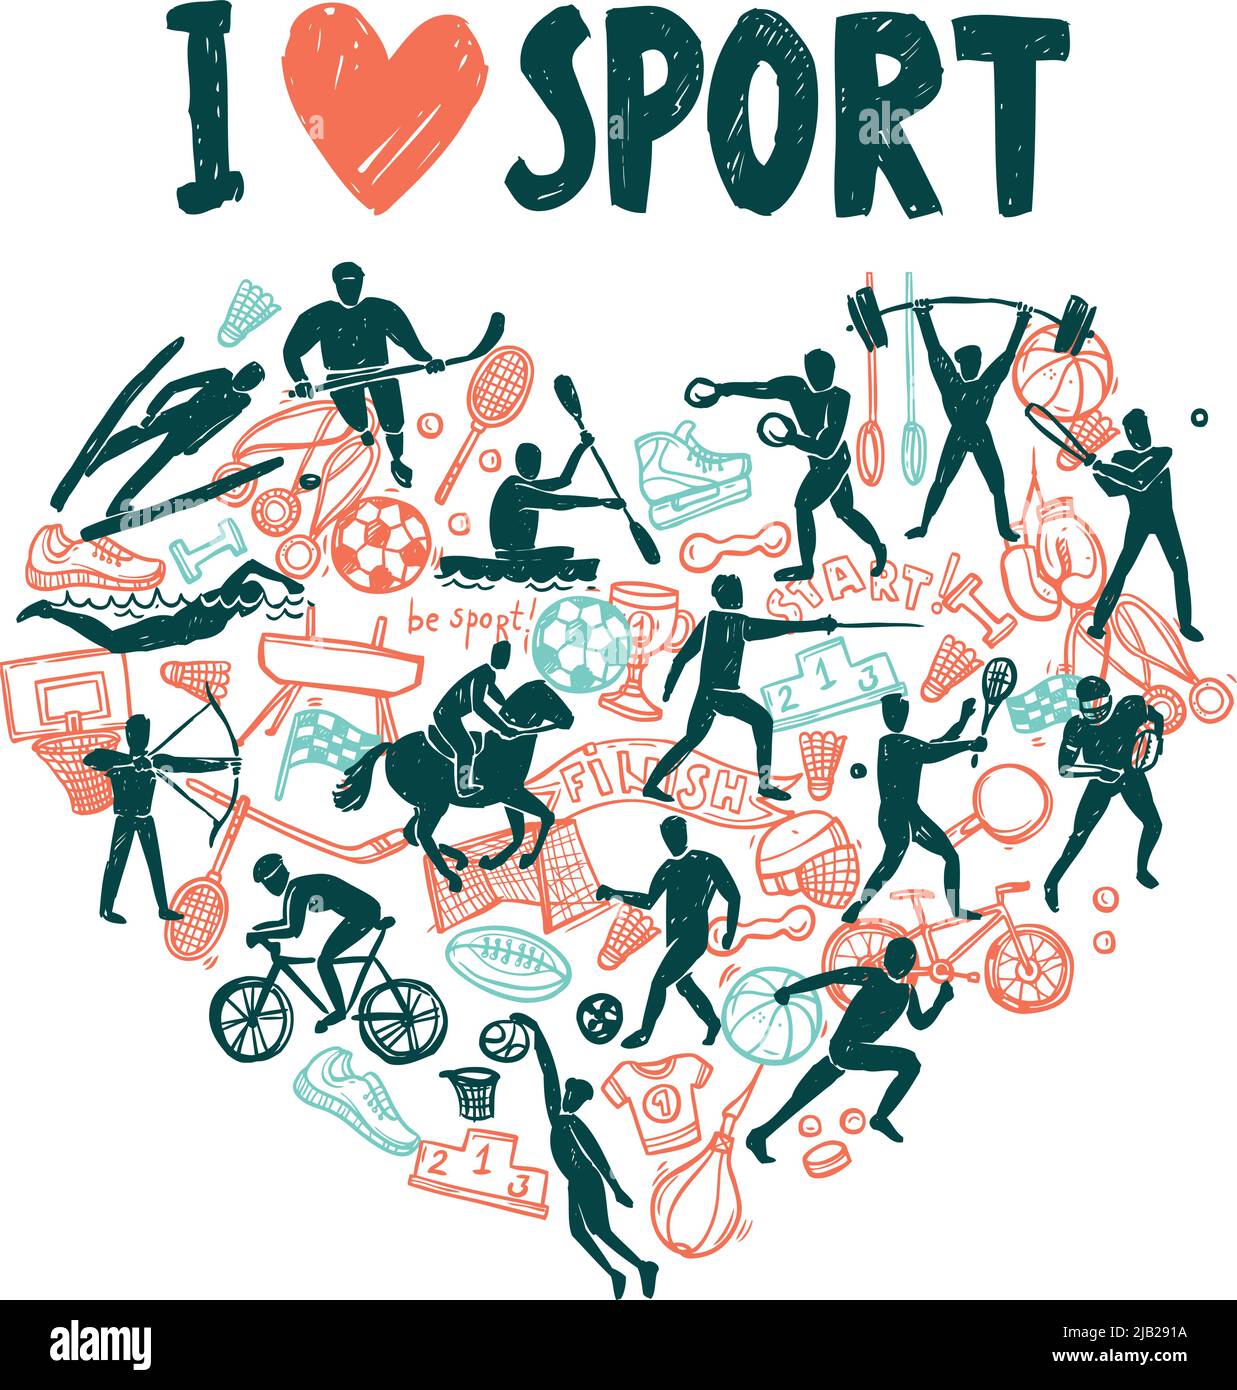 Love sport concept with hand drawn athletes in hears shape vector illustration Stock Vector